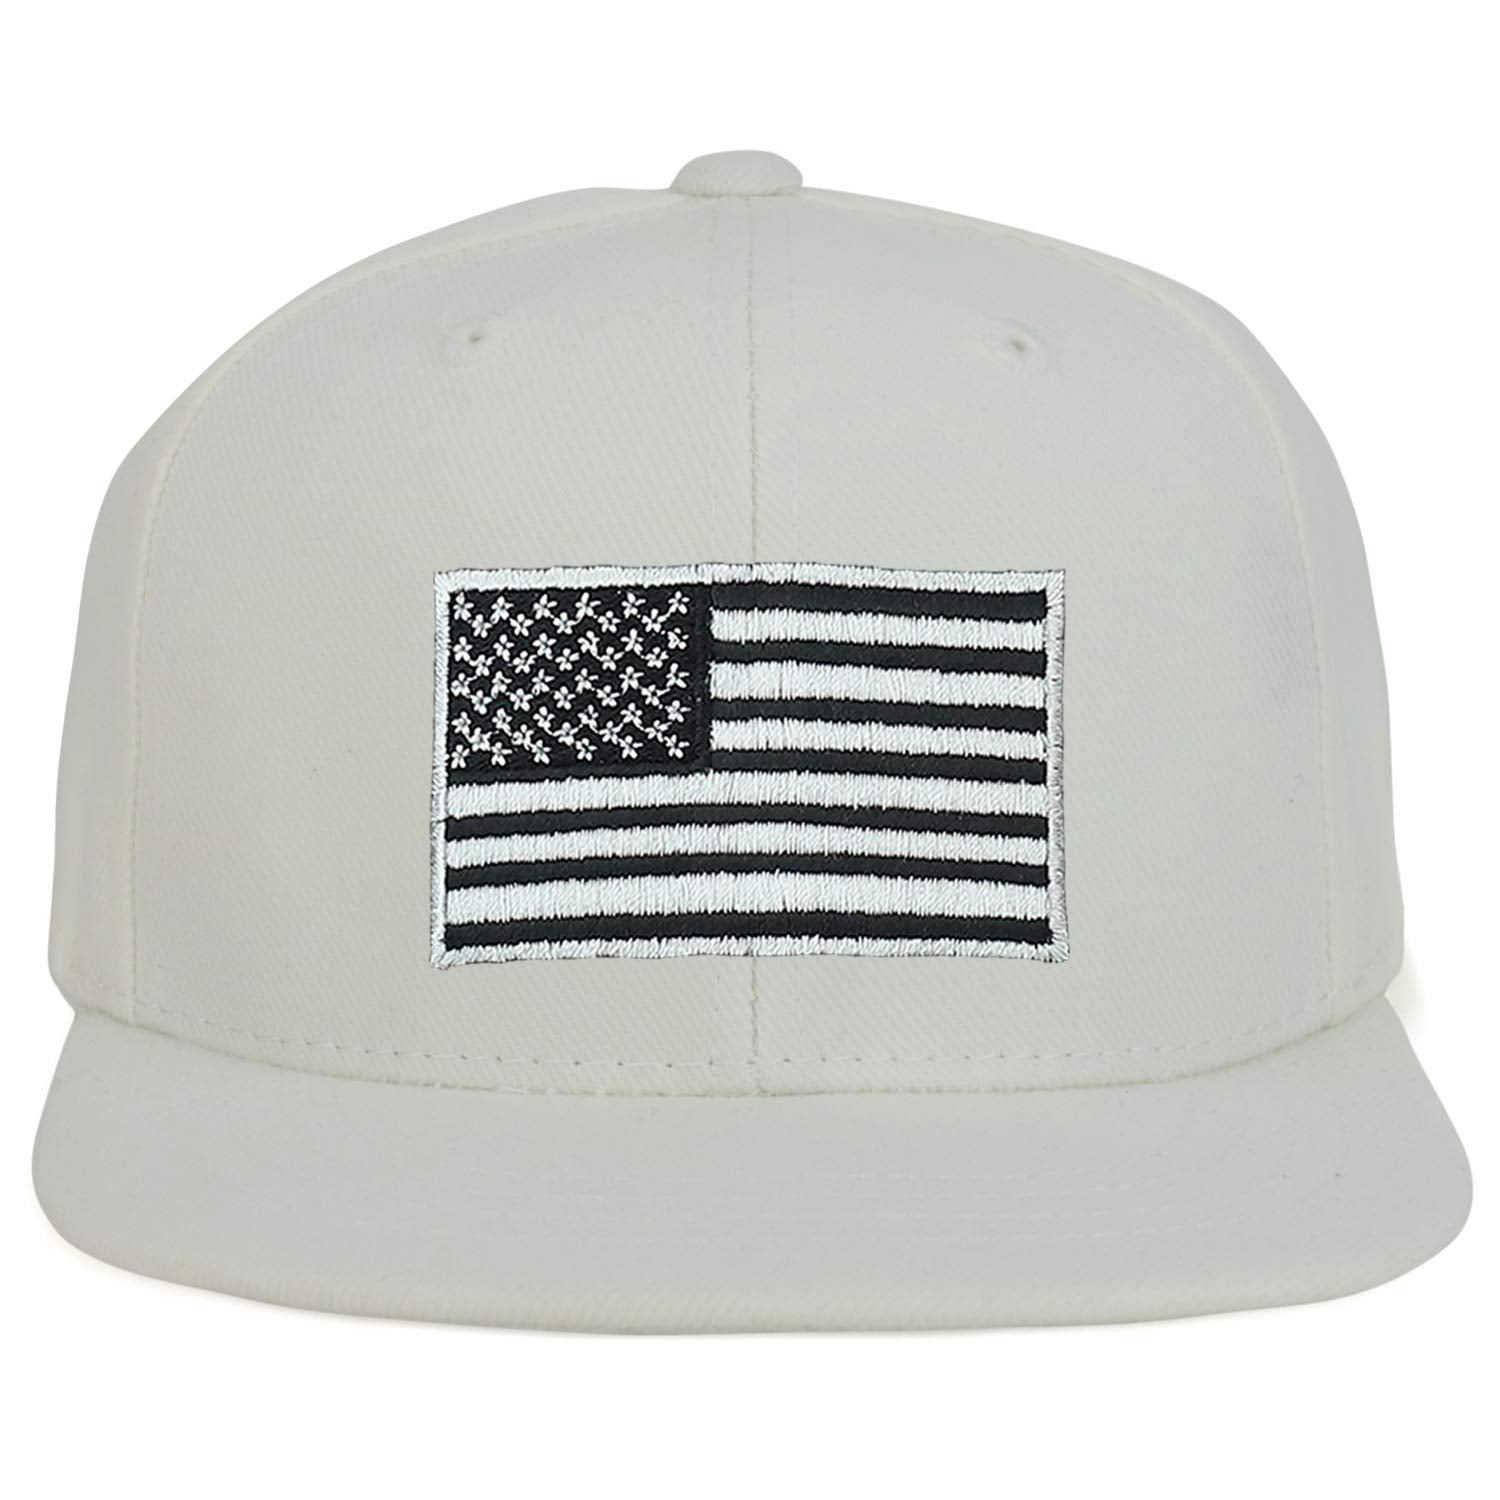 Armycrew Youth Kid Size American Flag Embroidered Flat Bill Snapback Baseball Cap